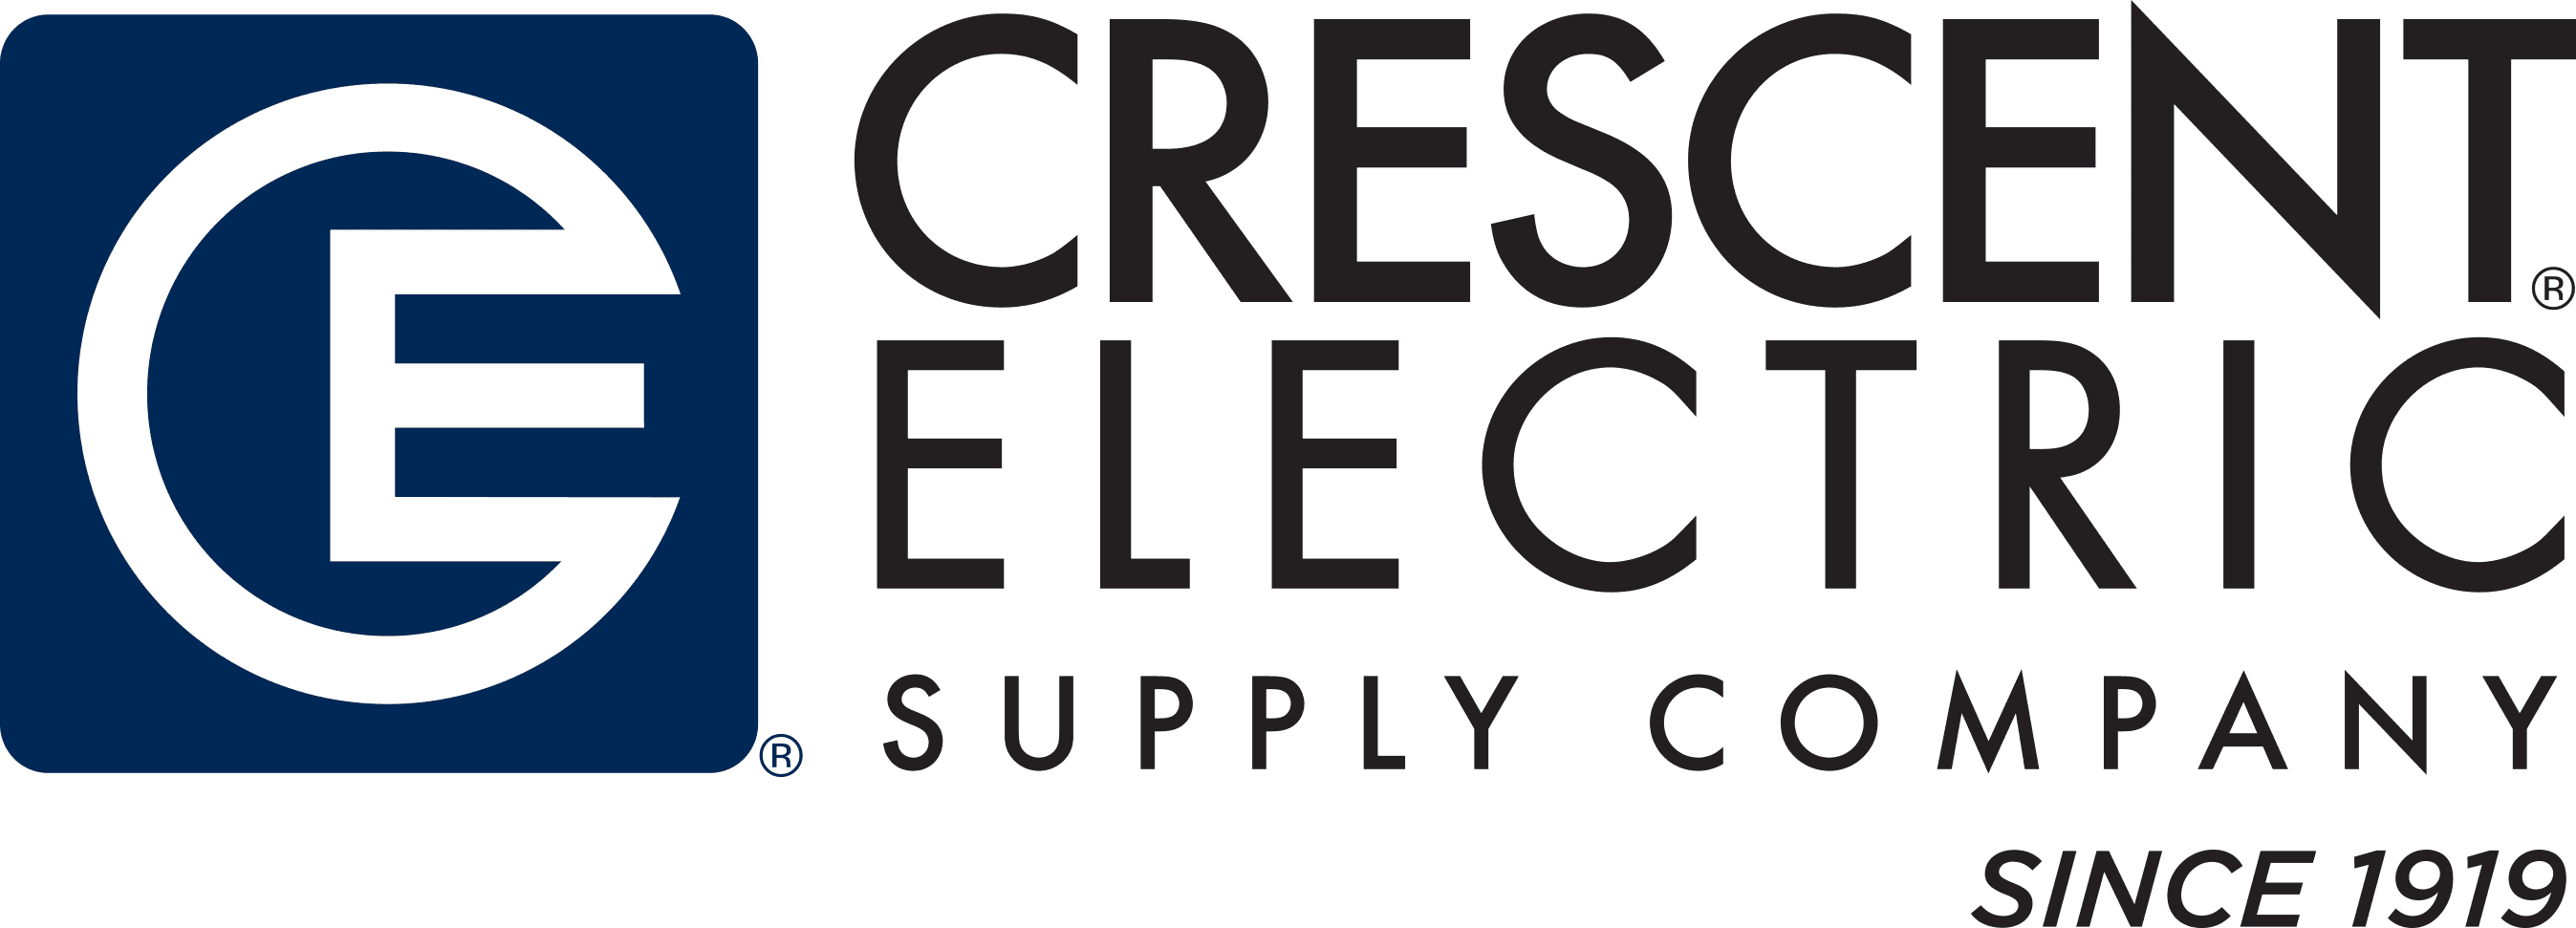 Crescent Electric Supply, Co.